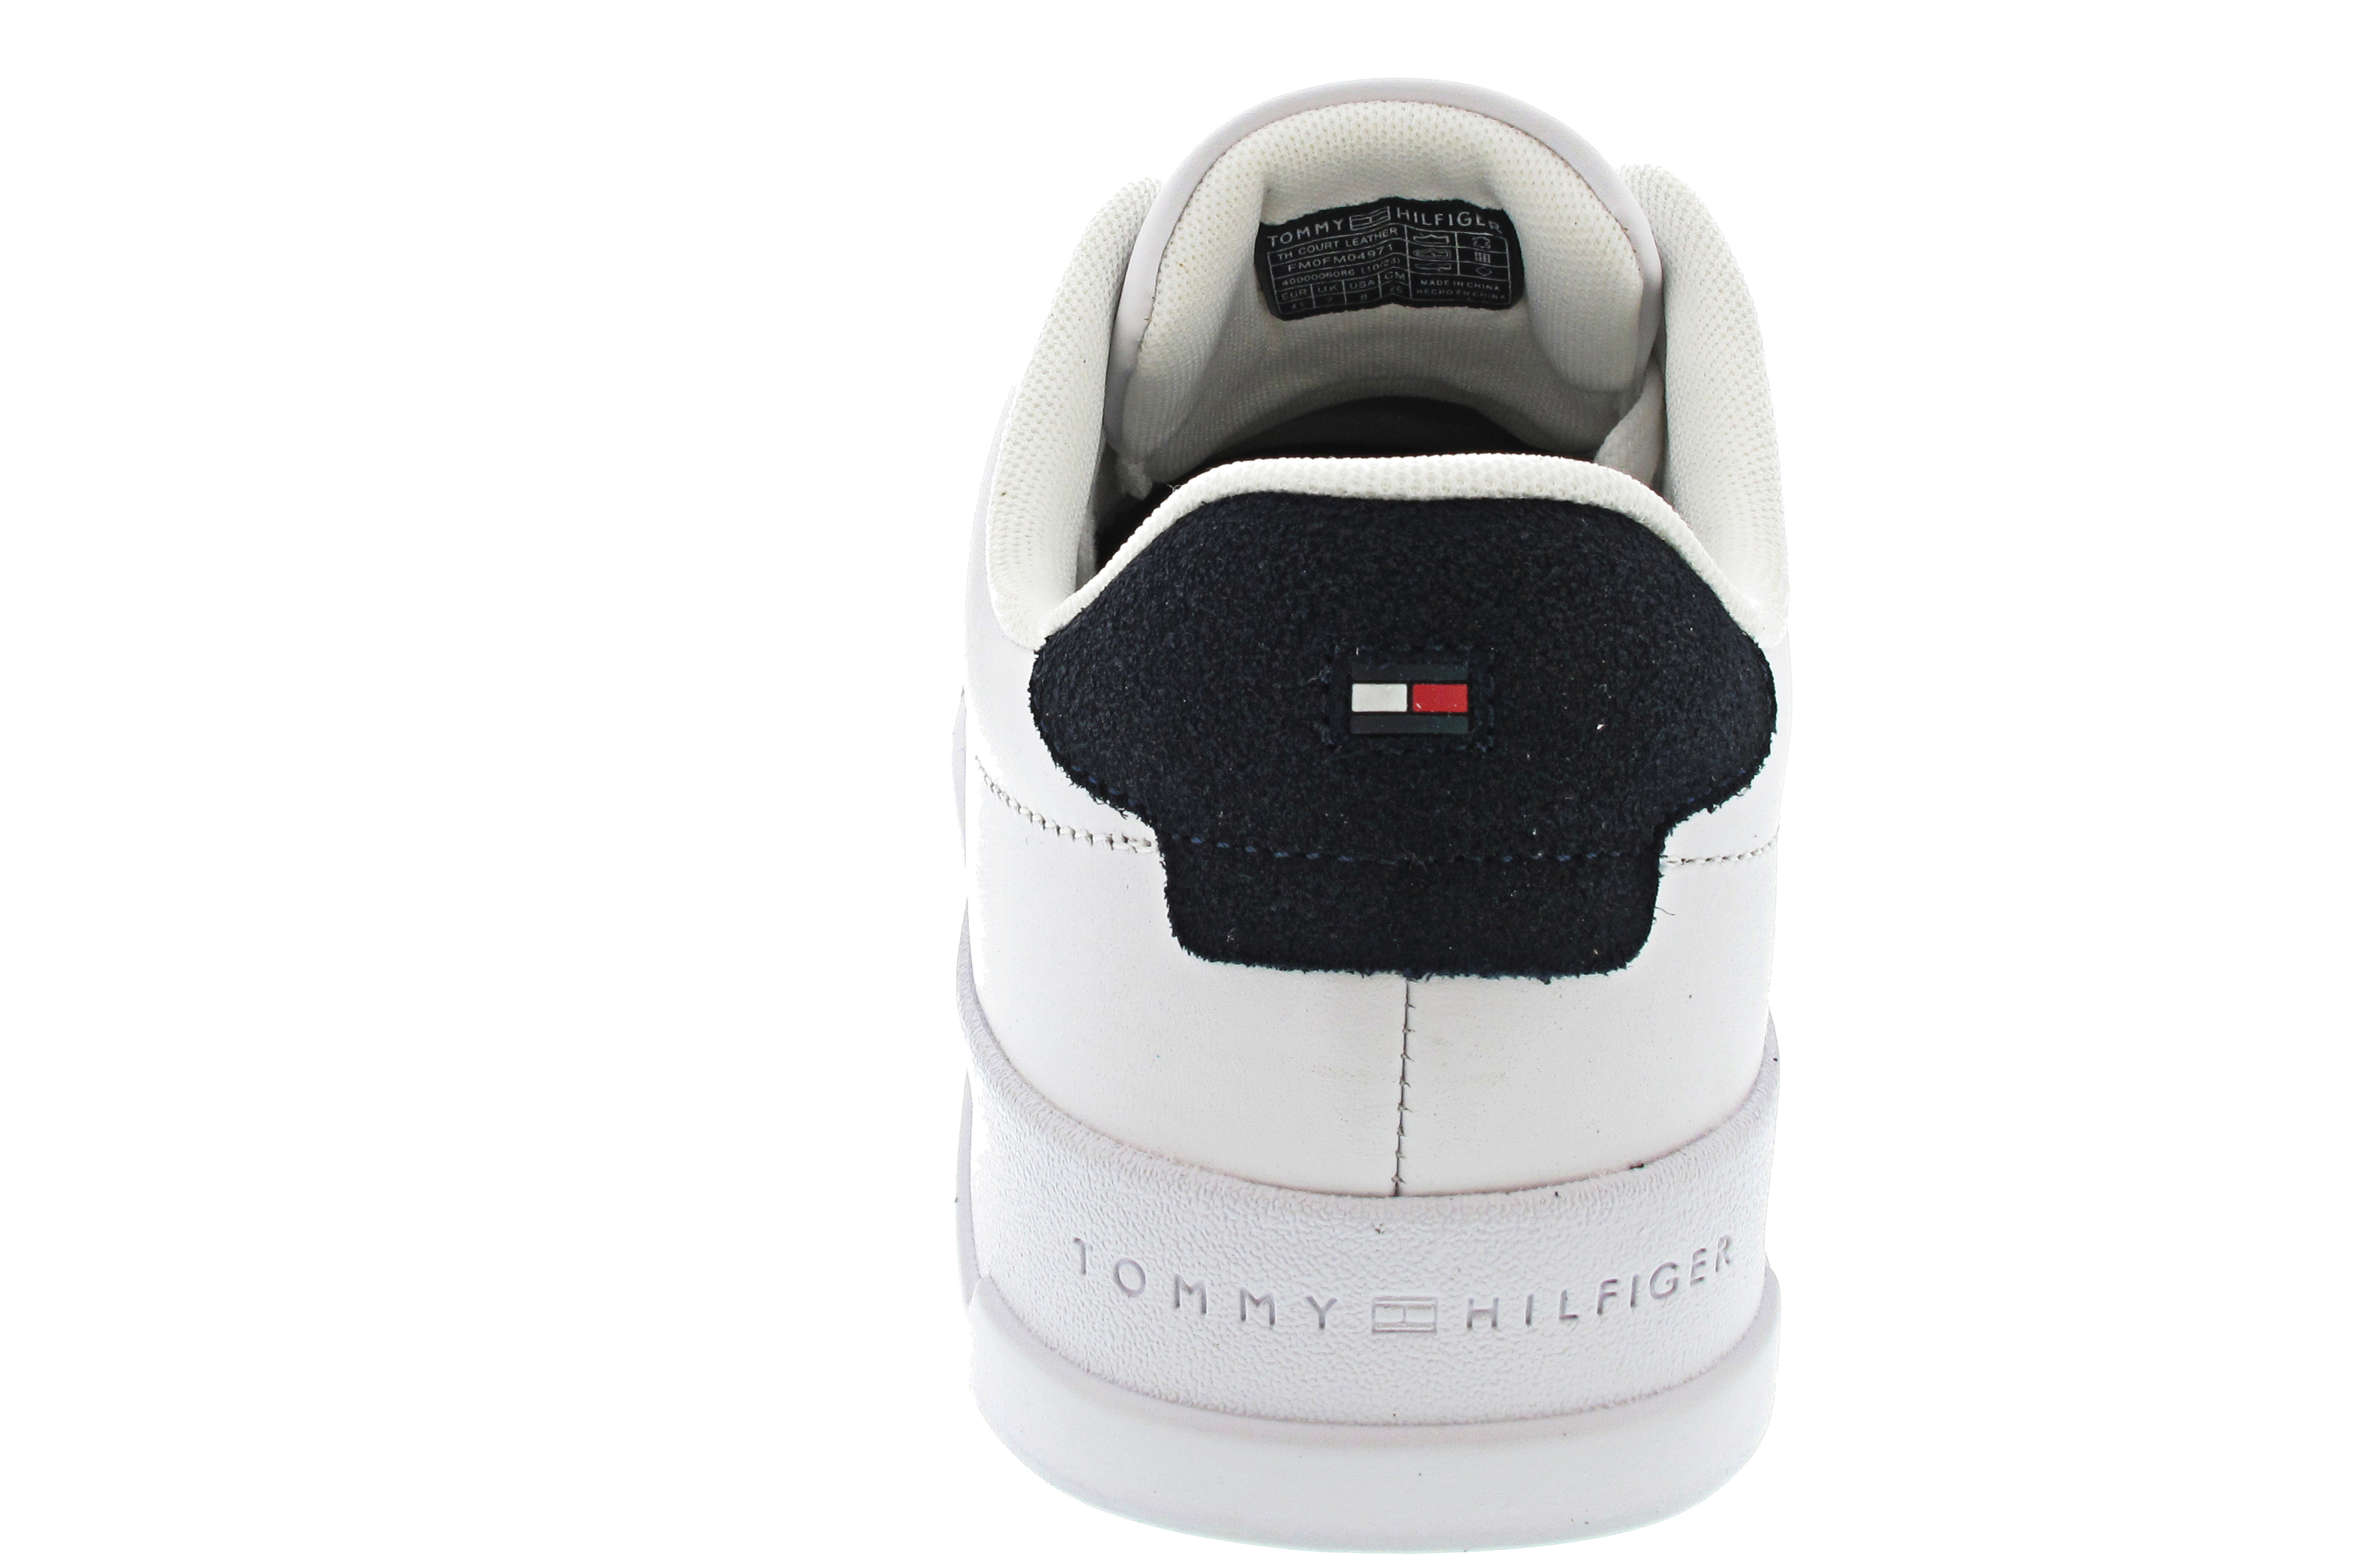 Tommy Hilfiger TH Court Leather